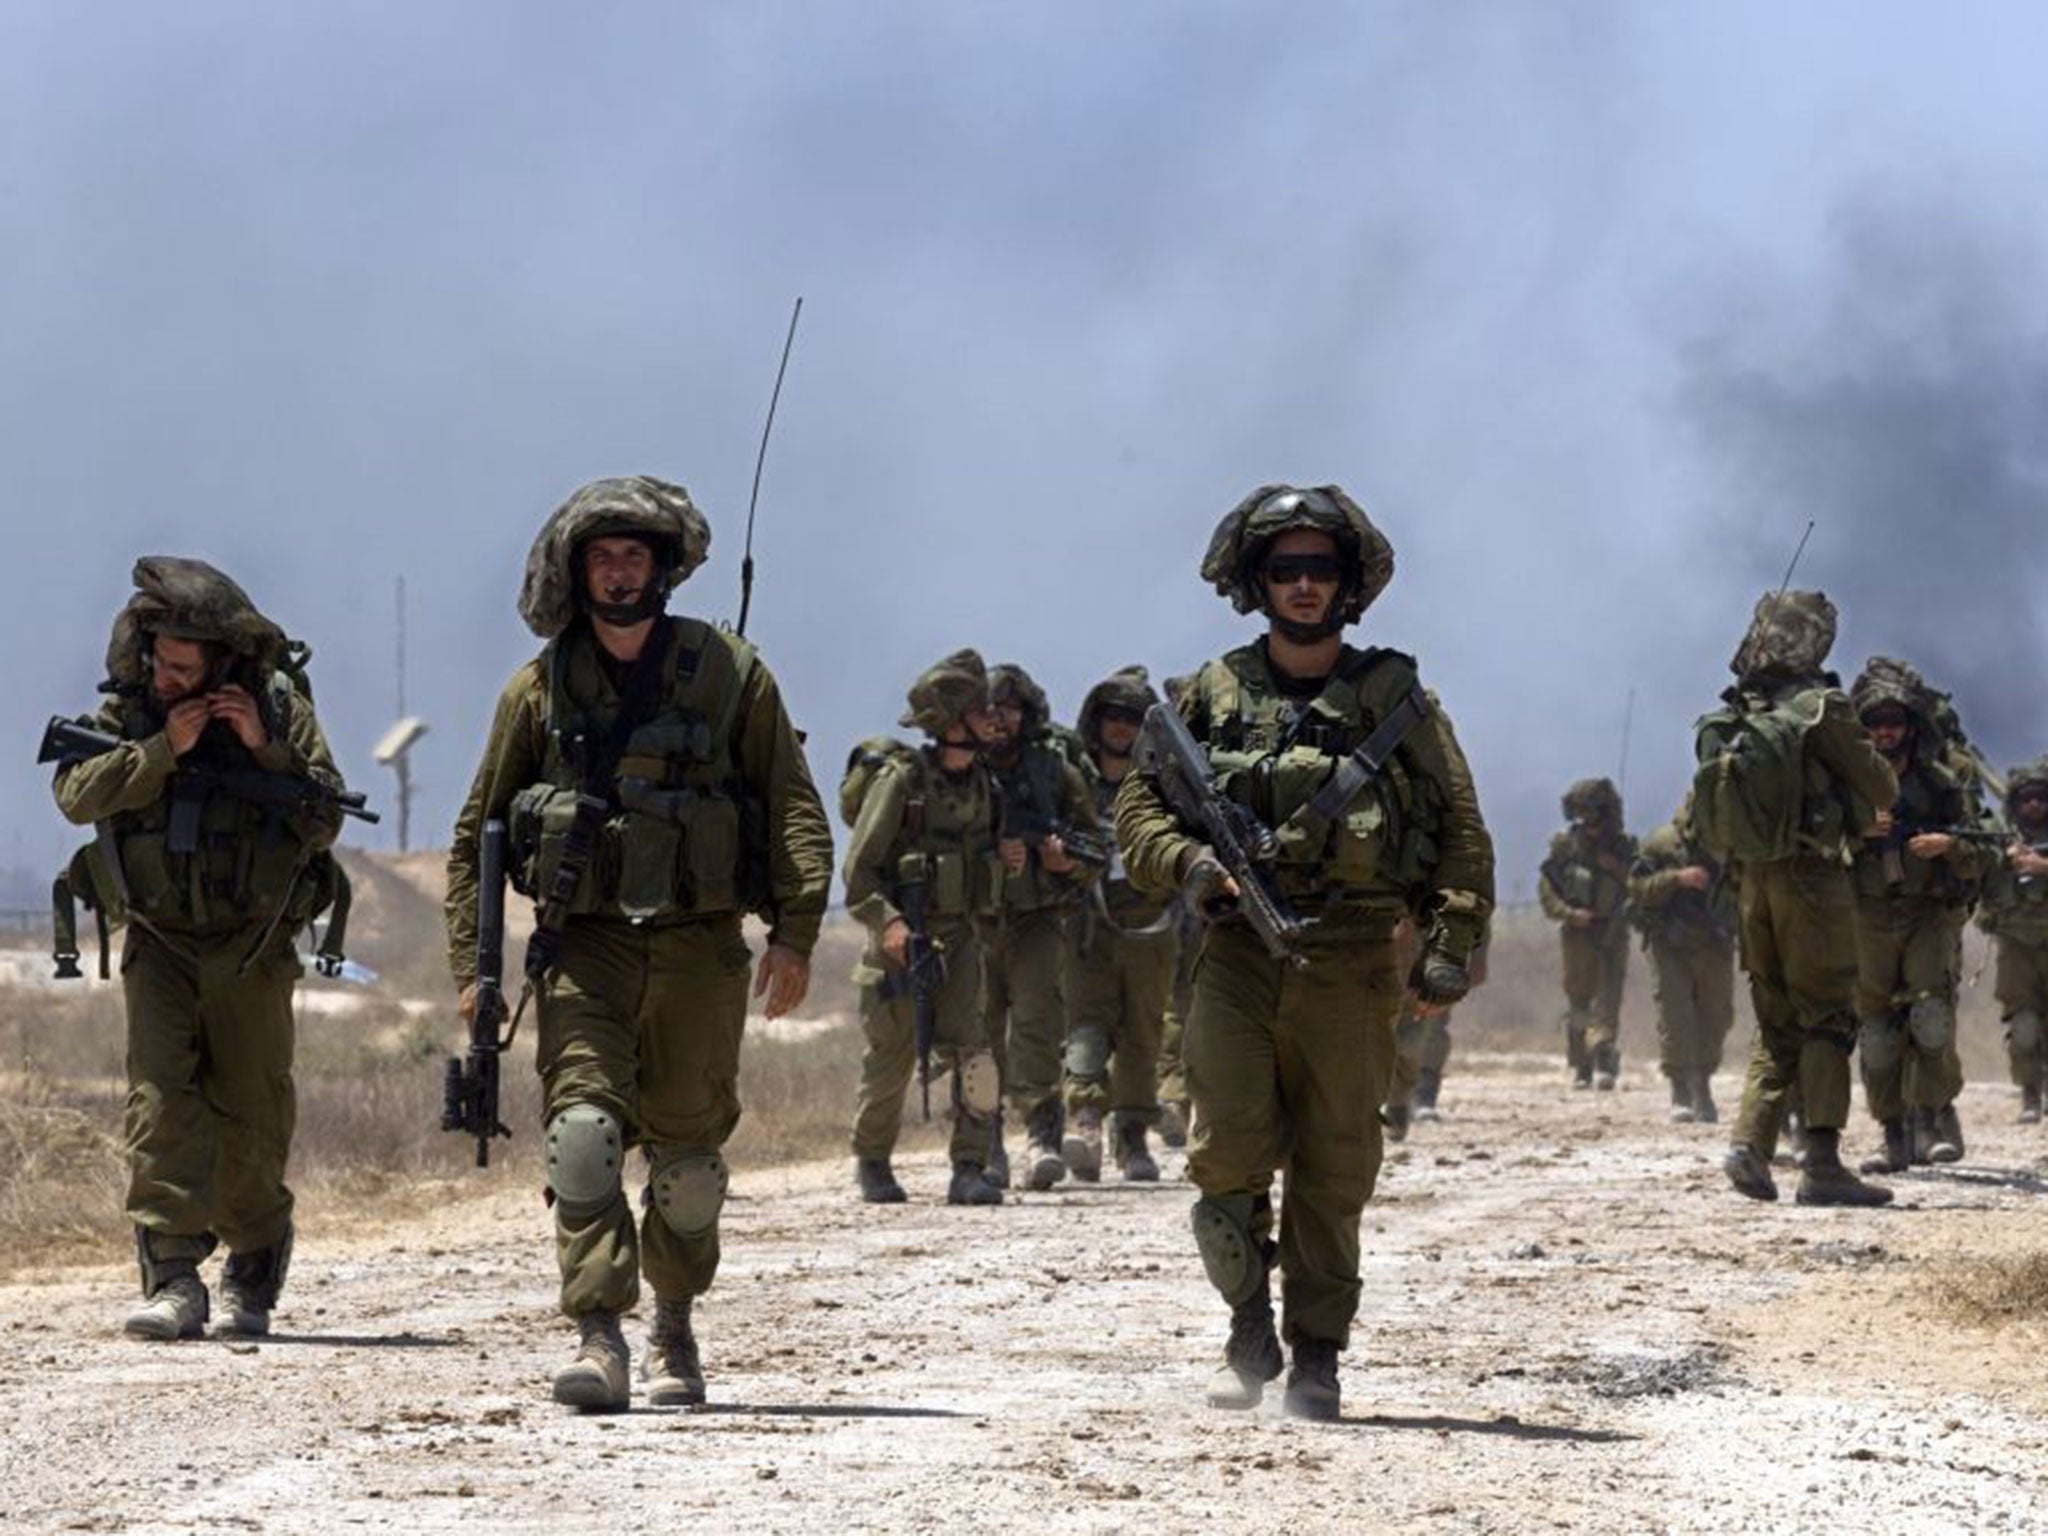 IDF troops returning to southern Israel after last week’s attacks on Gaza